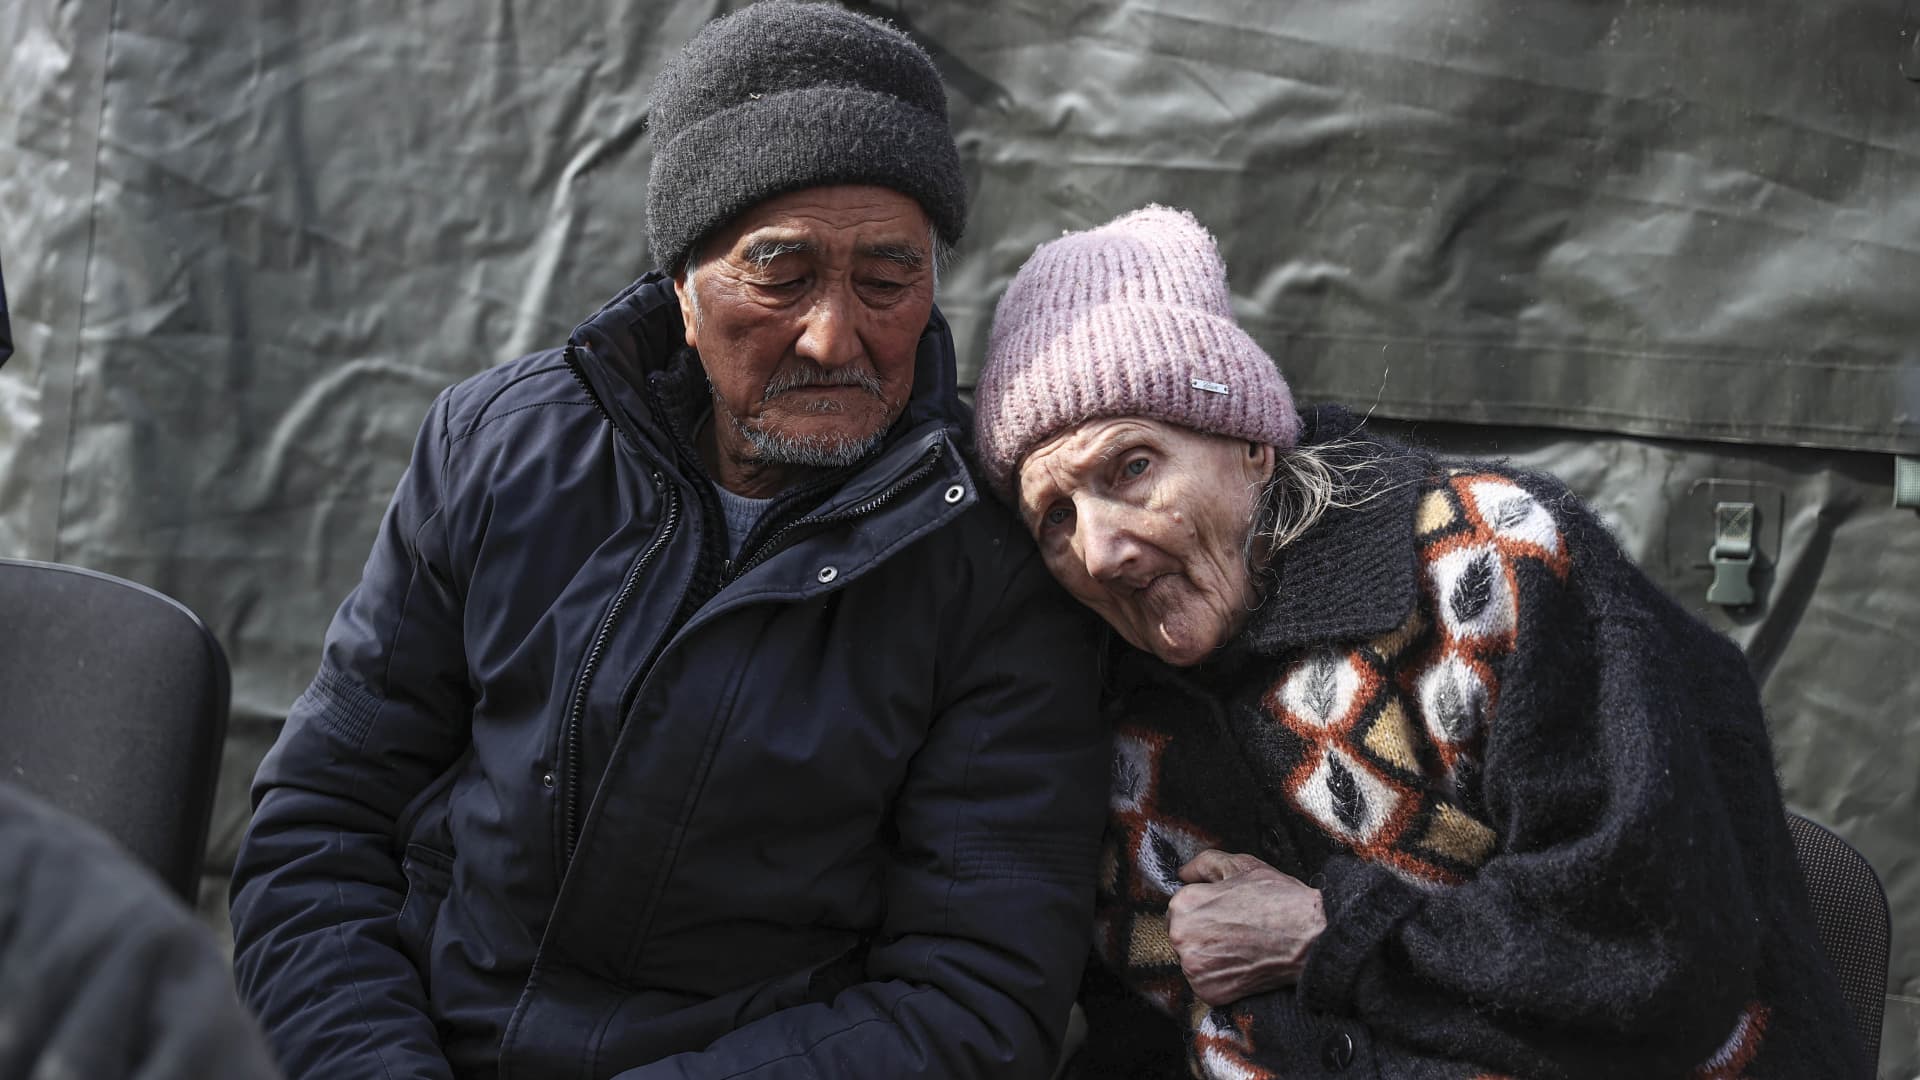 69 years old Boris Khijniak and his 75 year old wife Galina are brought to a center near Ukrainian capital Kyiv's Irpin as evacuation of civilians from Ukraine's Irpin continue, on March 26, 2022.